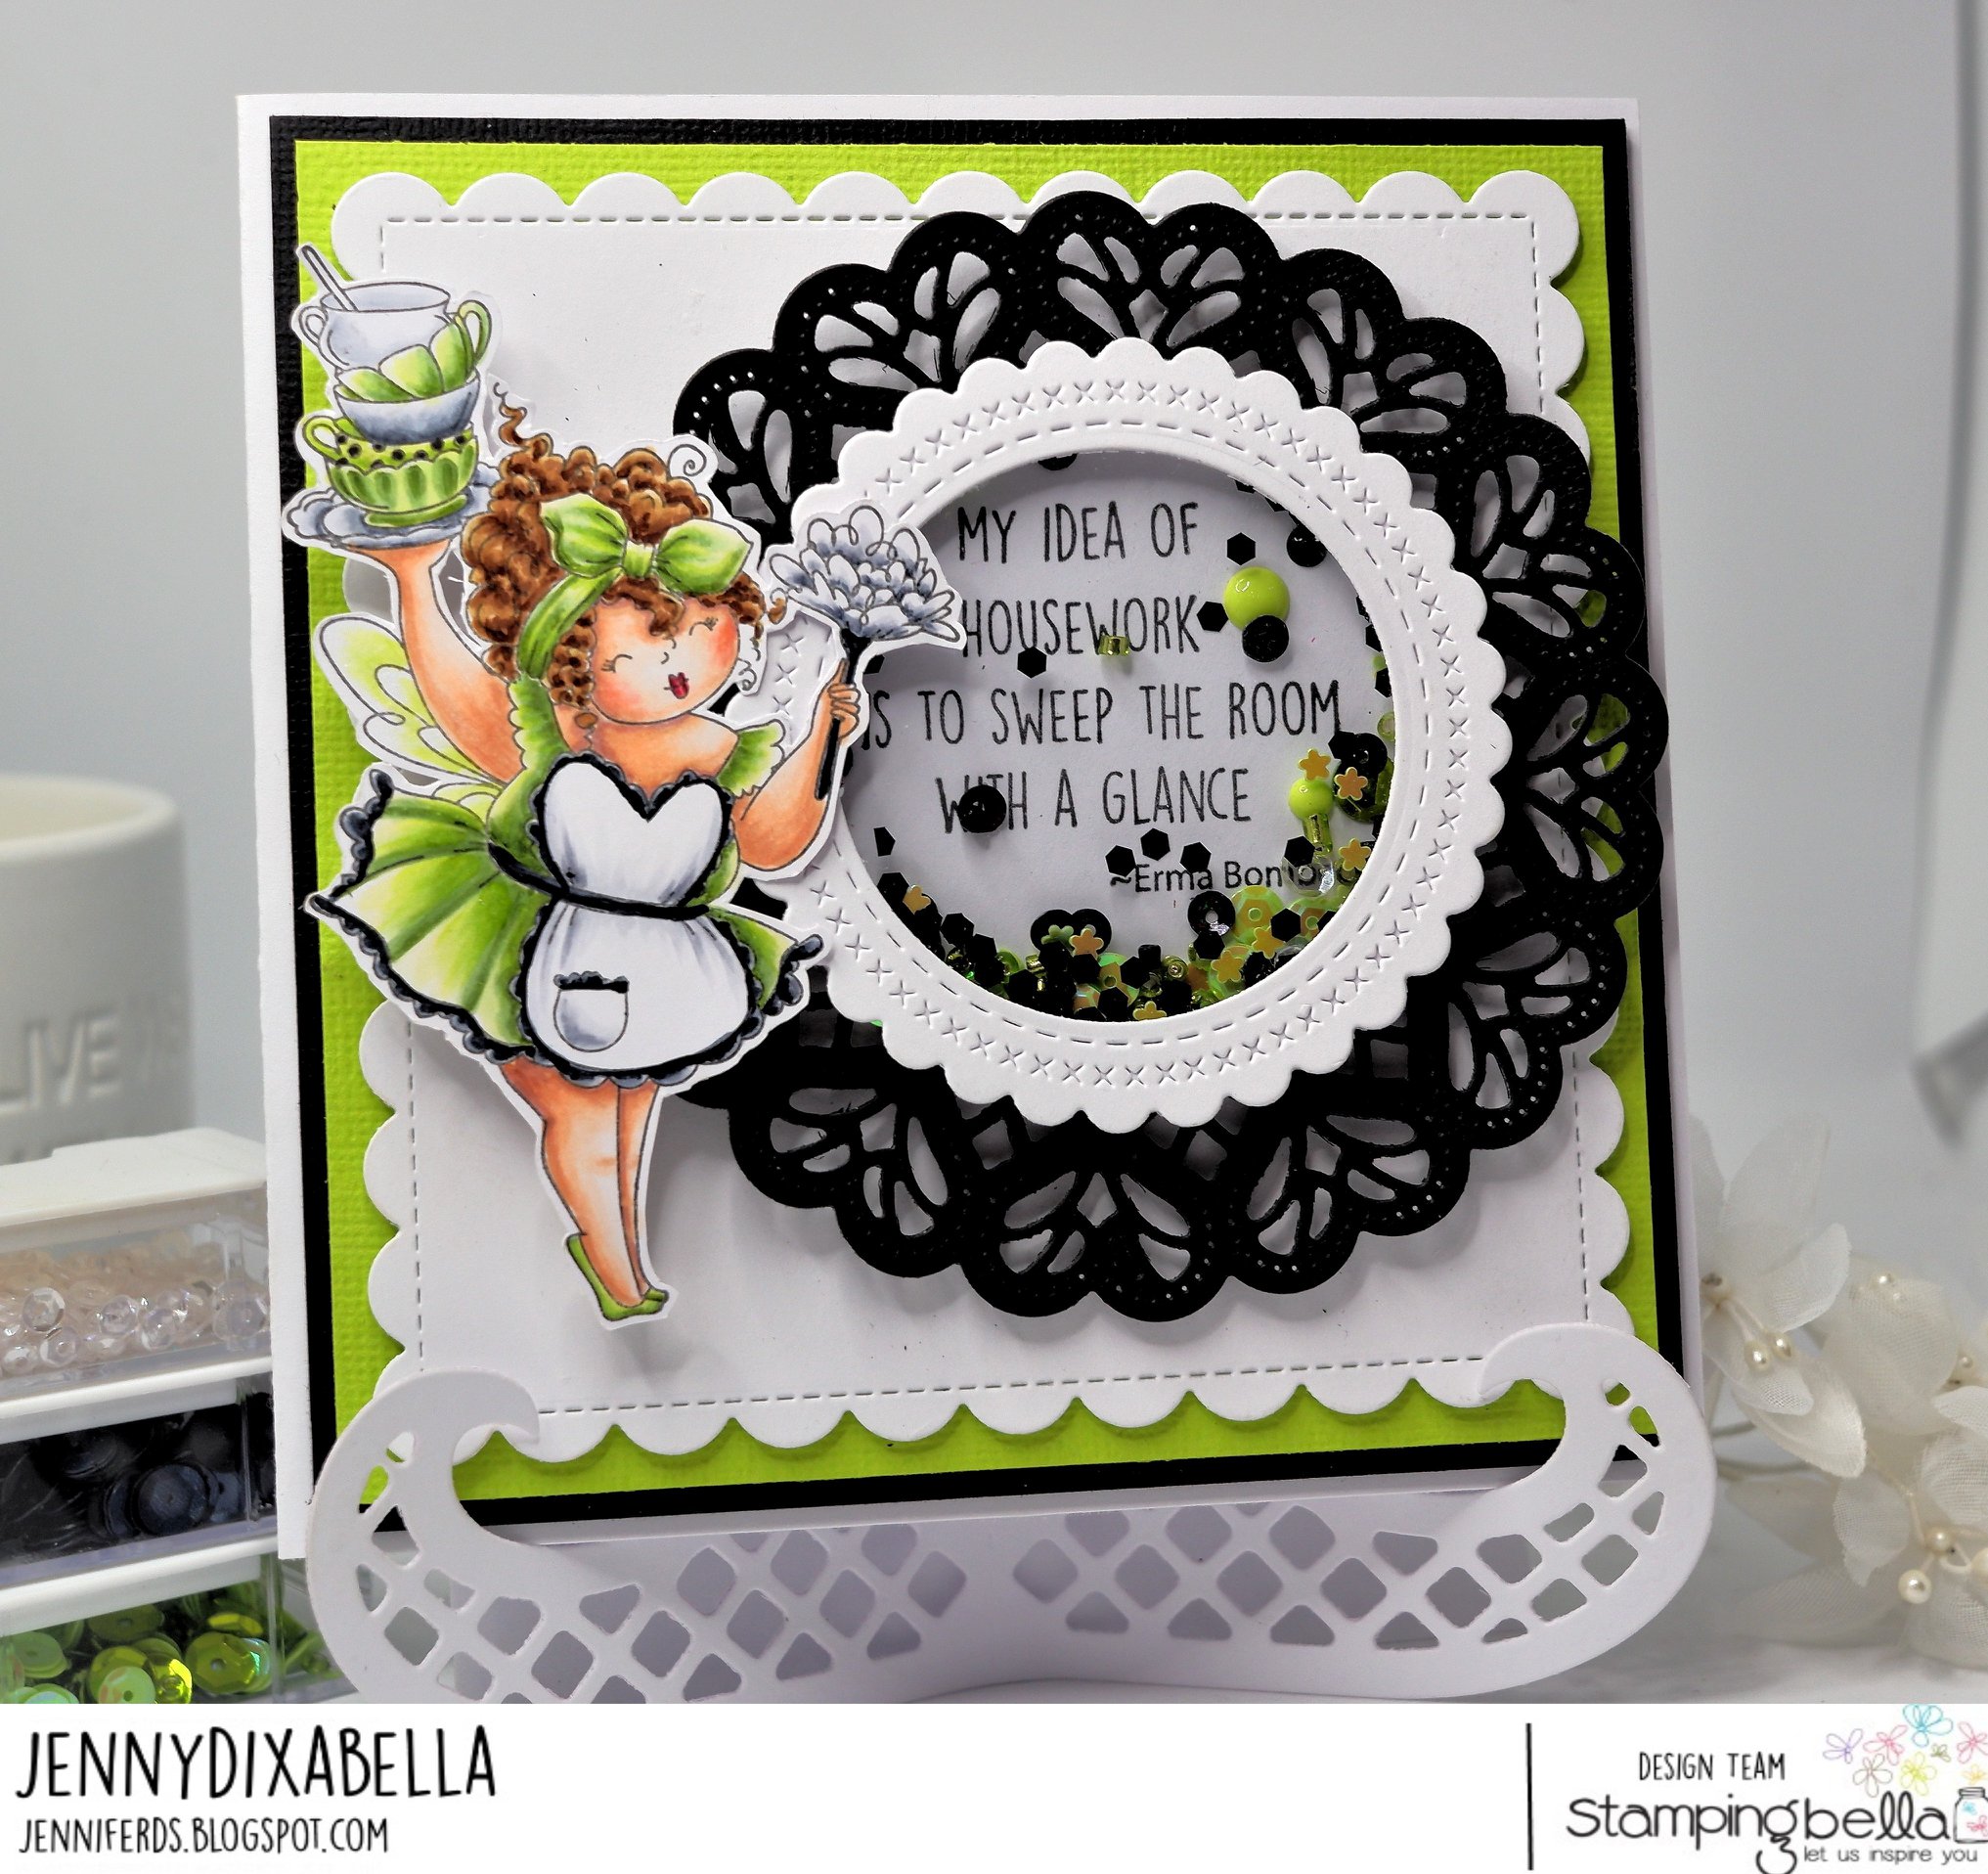 www.stampingbella.com: rubber stamp used: EDNA LOVES TO SWEEP, card by  Jenny dix